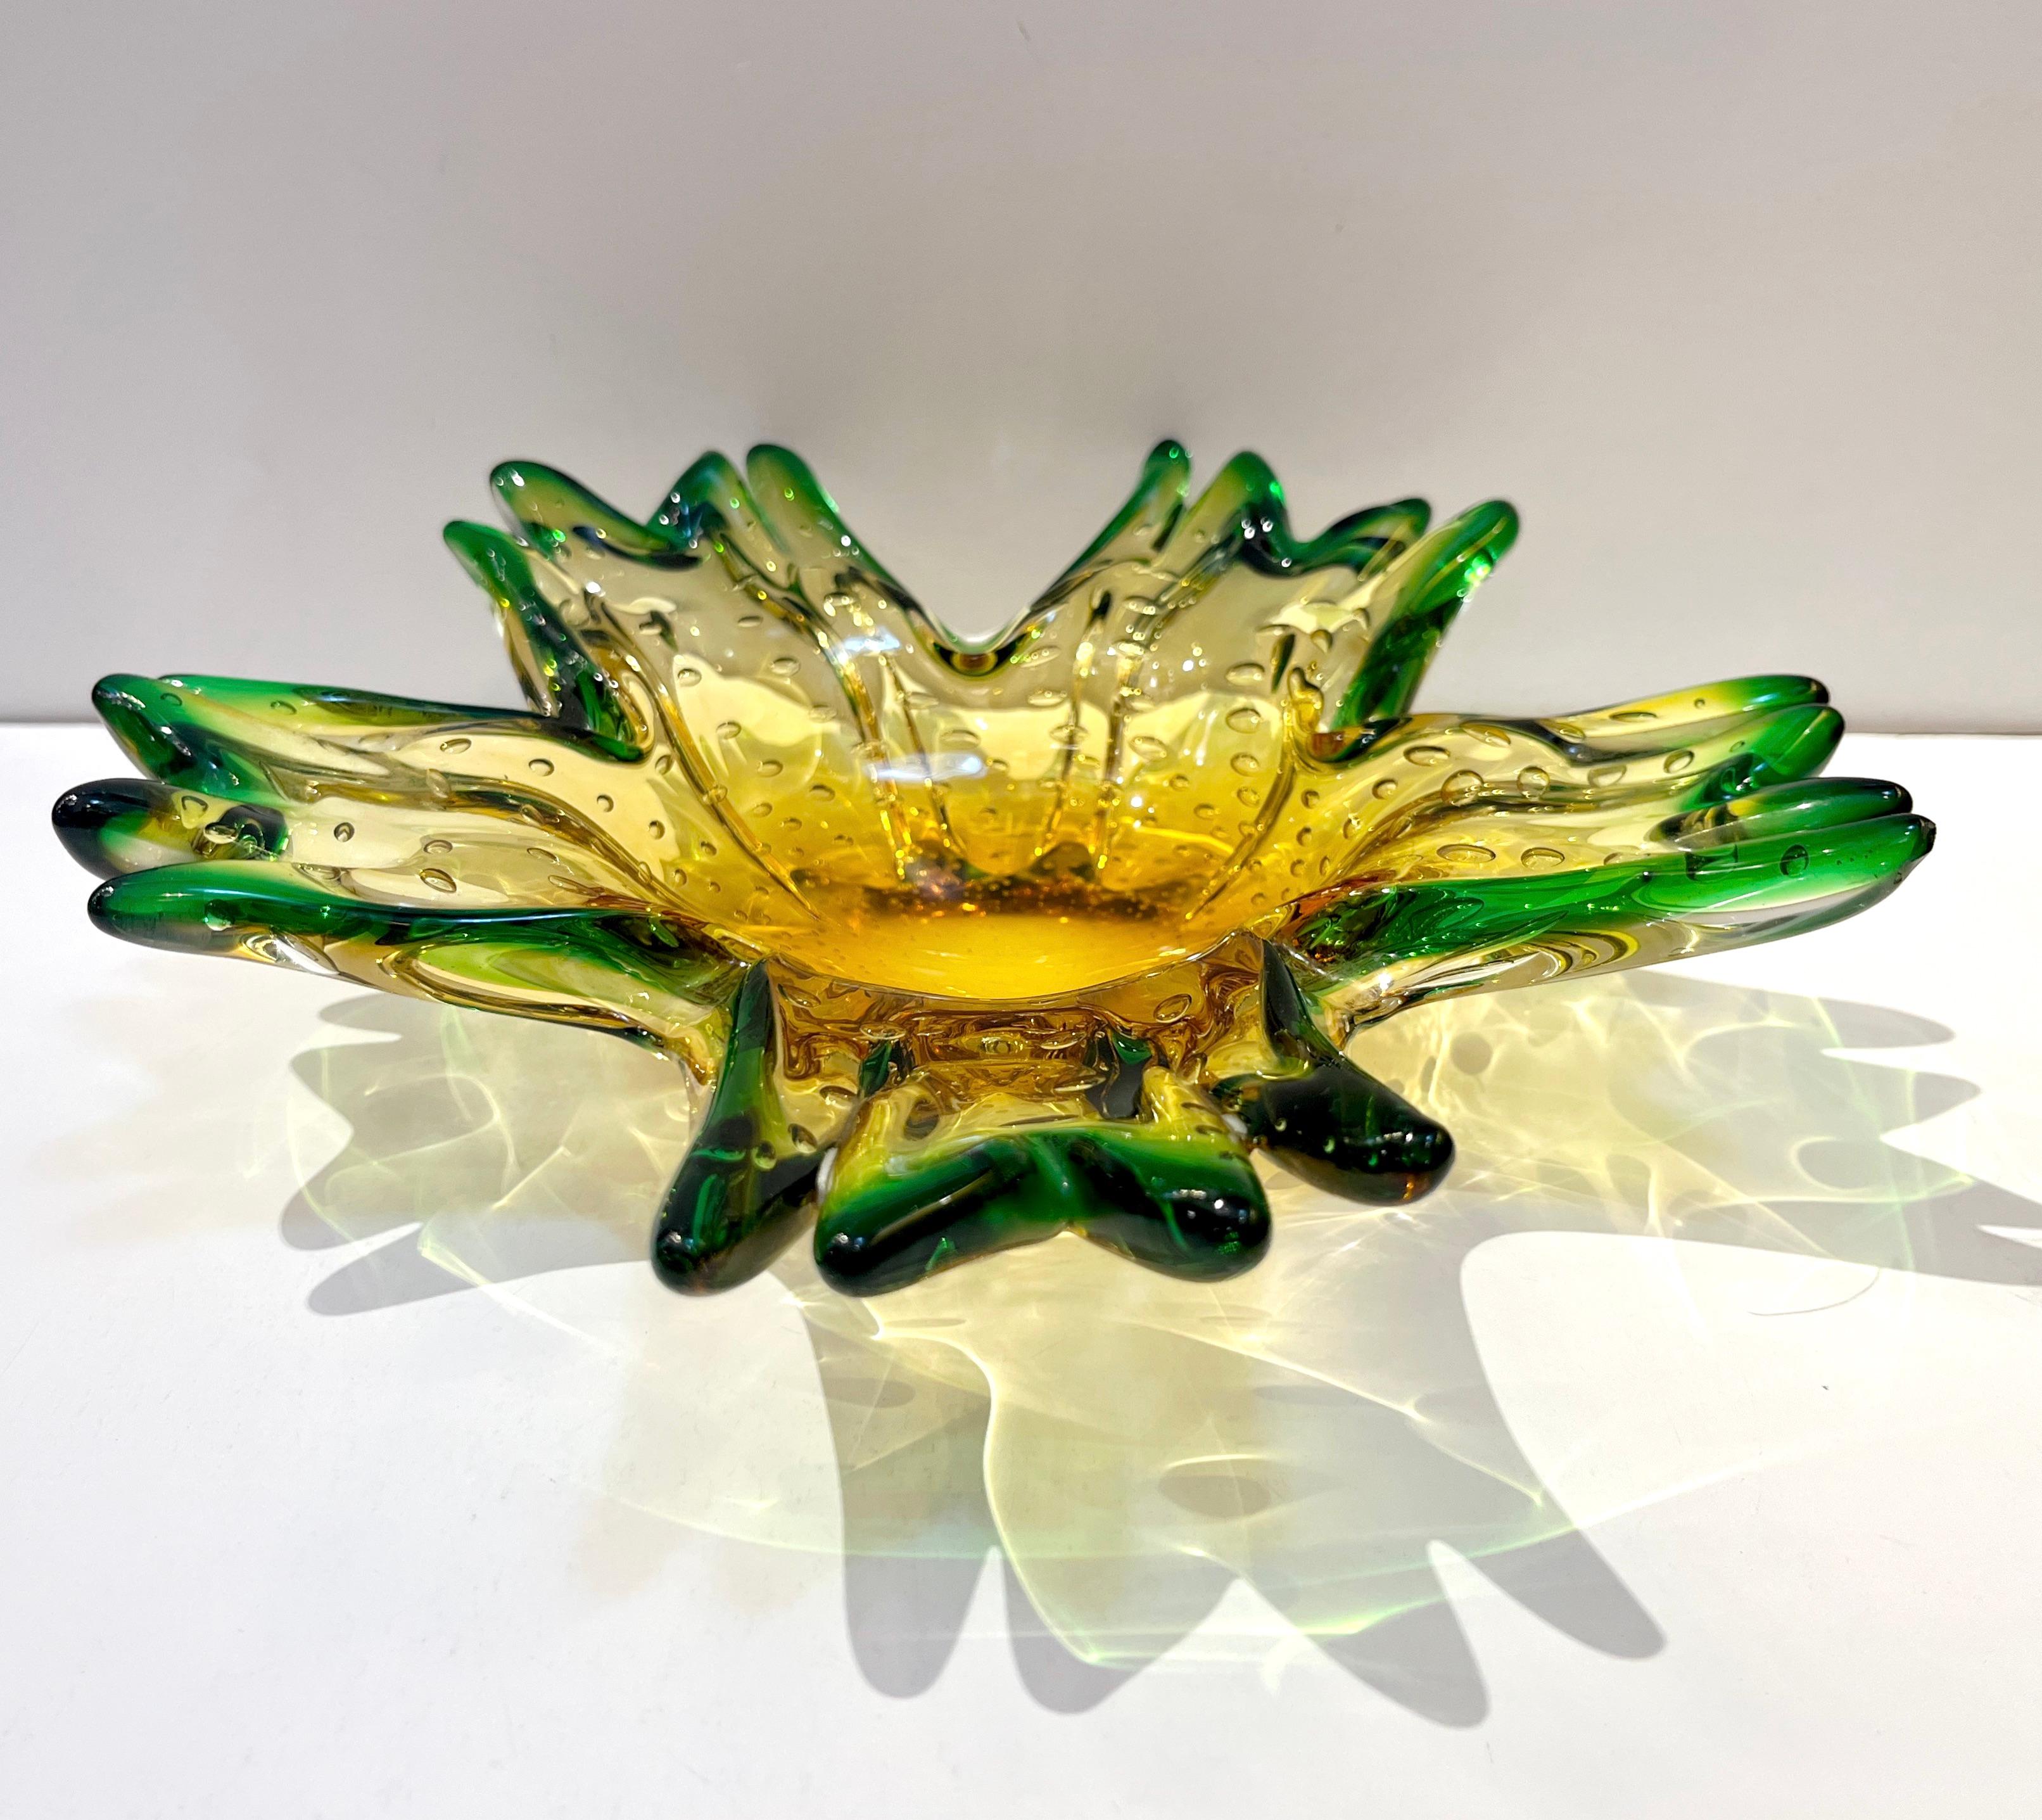 Circa 1970s, one-of-a-kind delightful and rare Venetian Art glass organic centerpiece / vide-poche, entirely Hand Made in blown Murano glass, high quality of execution in 2 colors: an amber color gradient with a rich transparent gold center and a